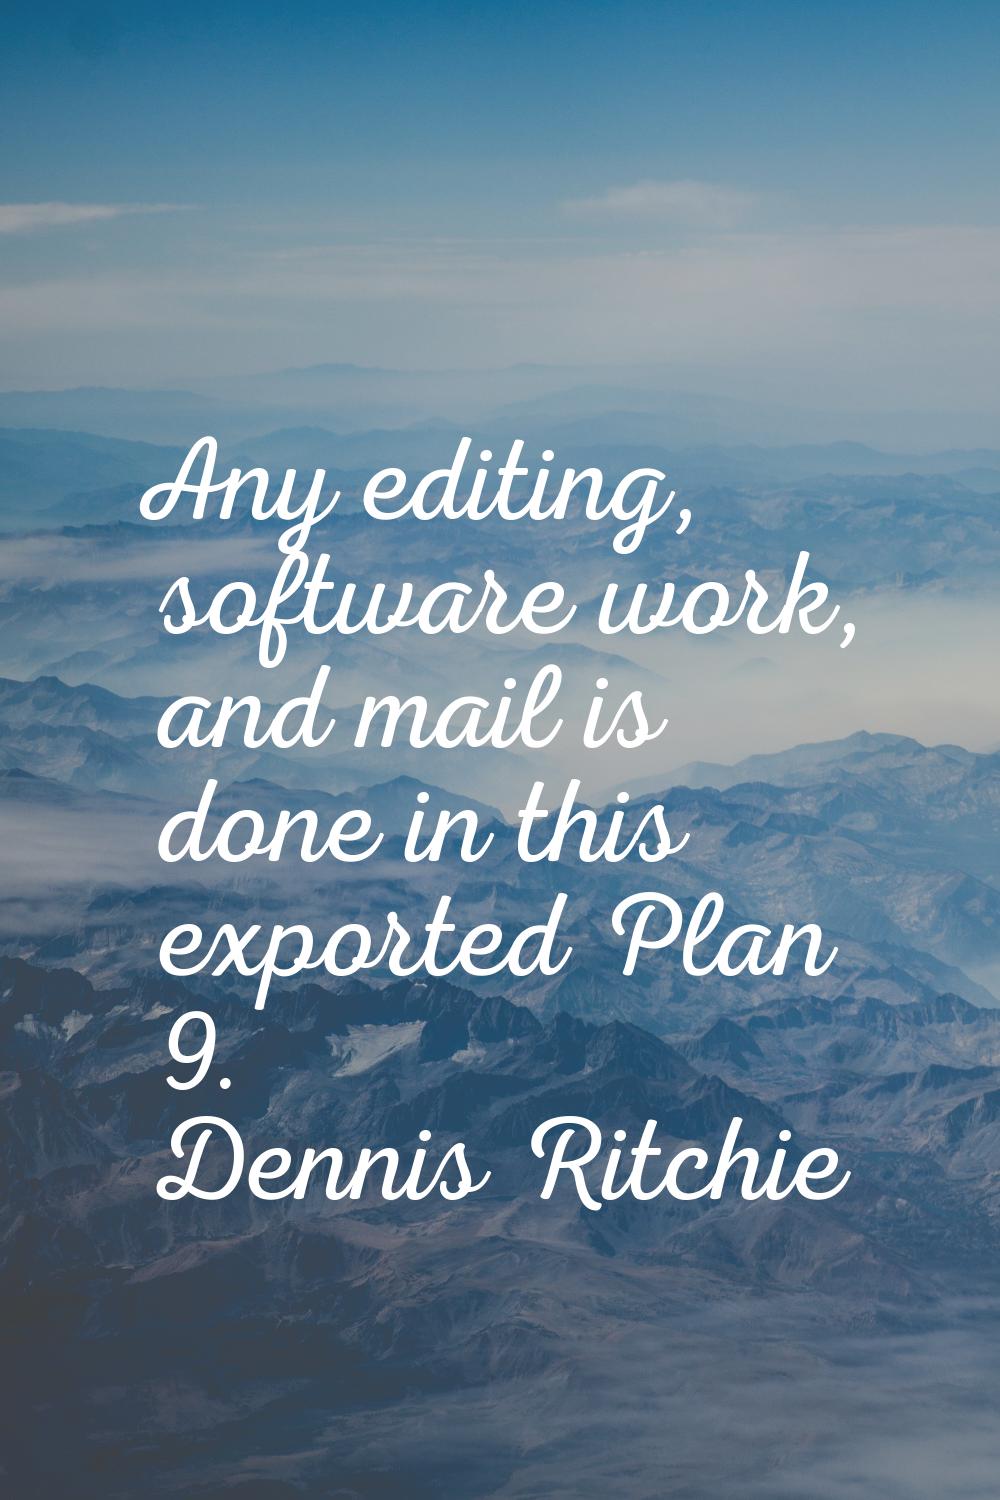 Any editing, software work, and mail is done in this exported Plan 9.